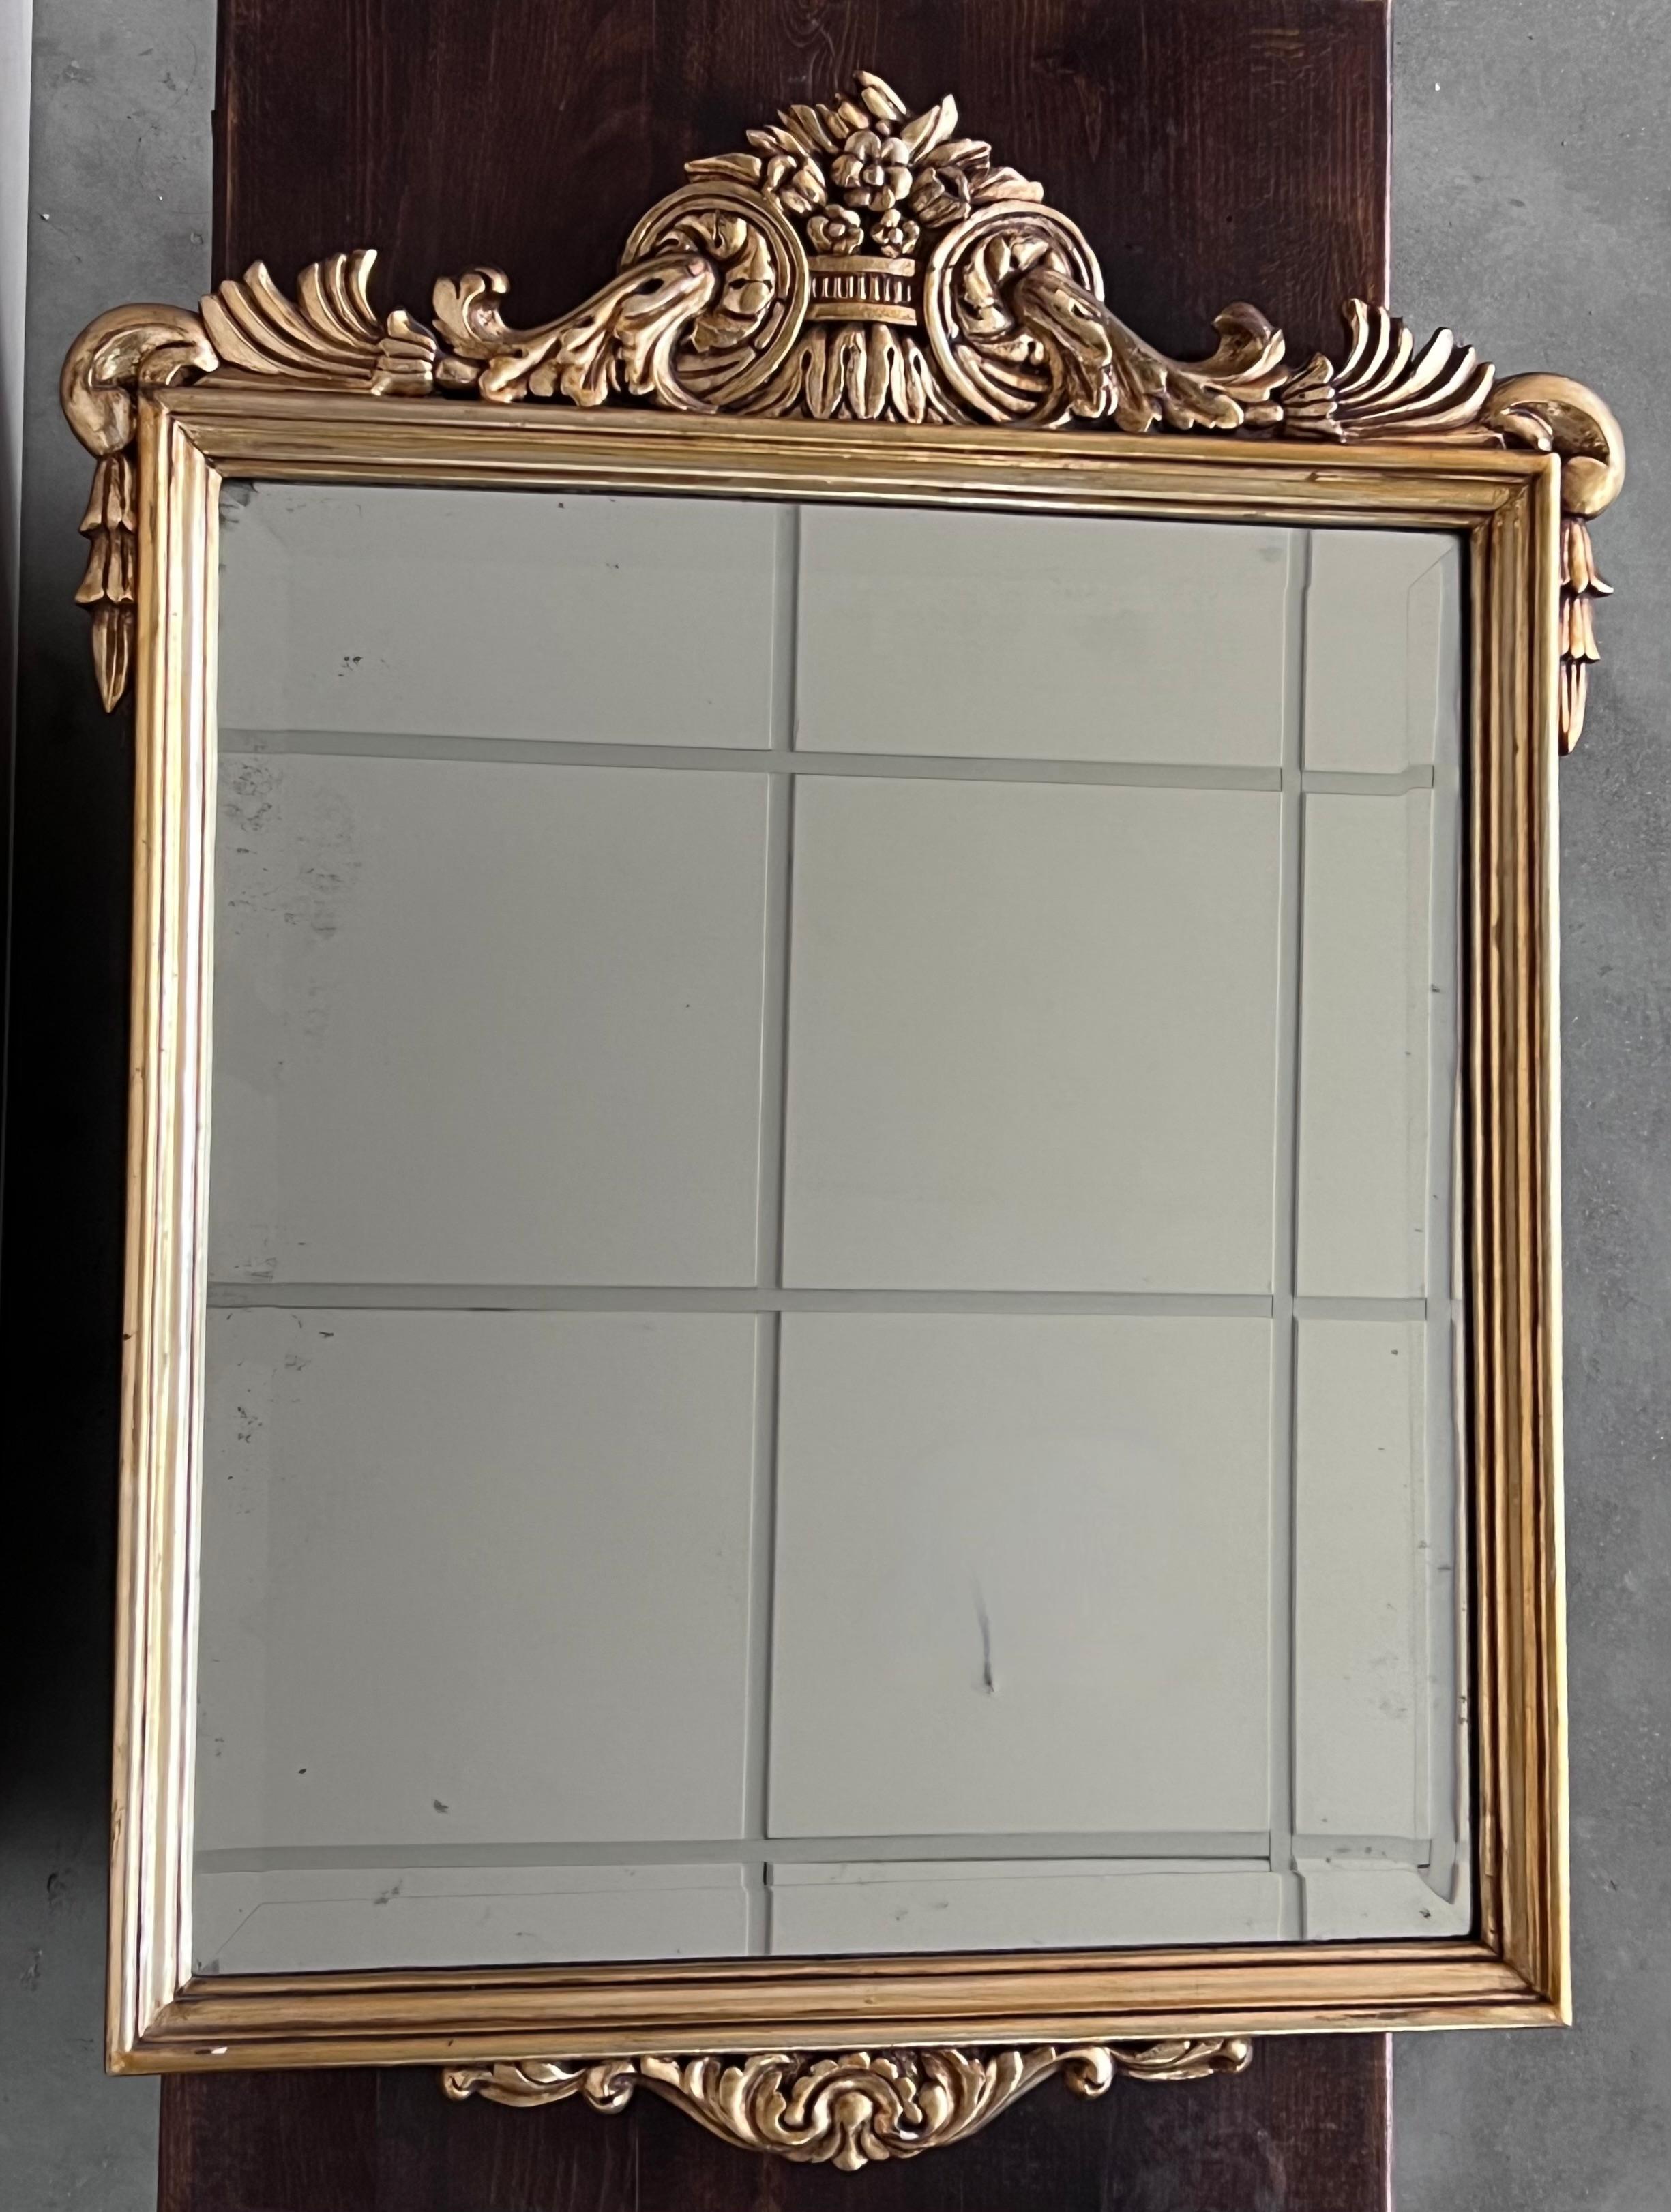 Regency 20th French Empire Period Carved Gilt Wood Rectangular Mirror with Crest